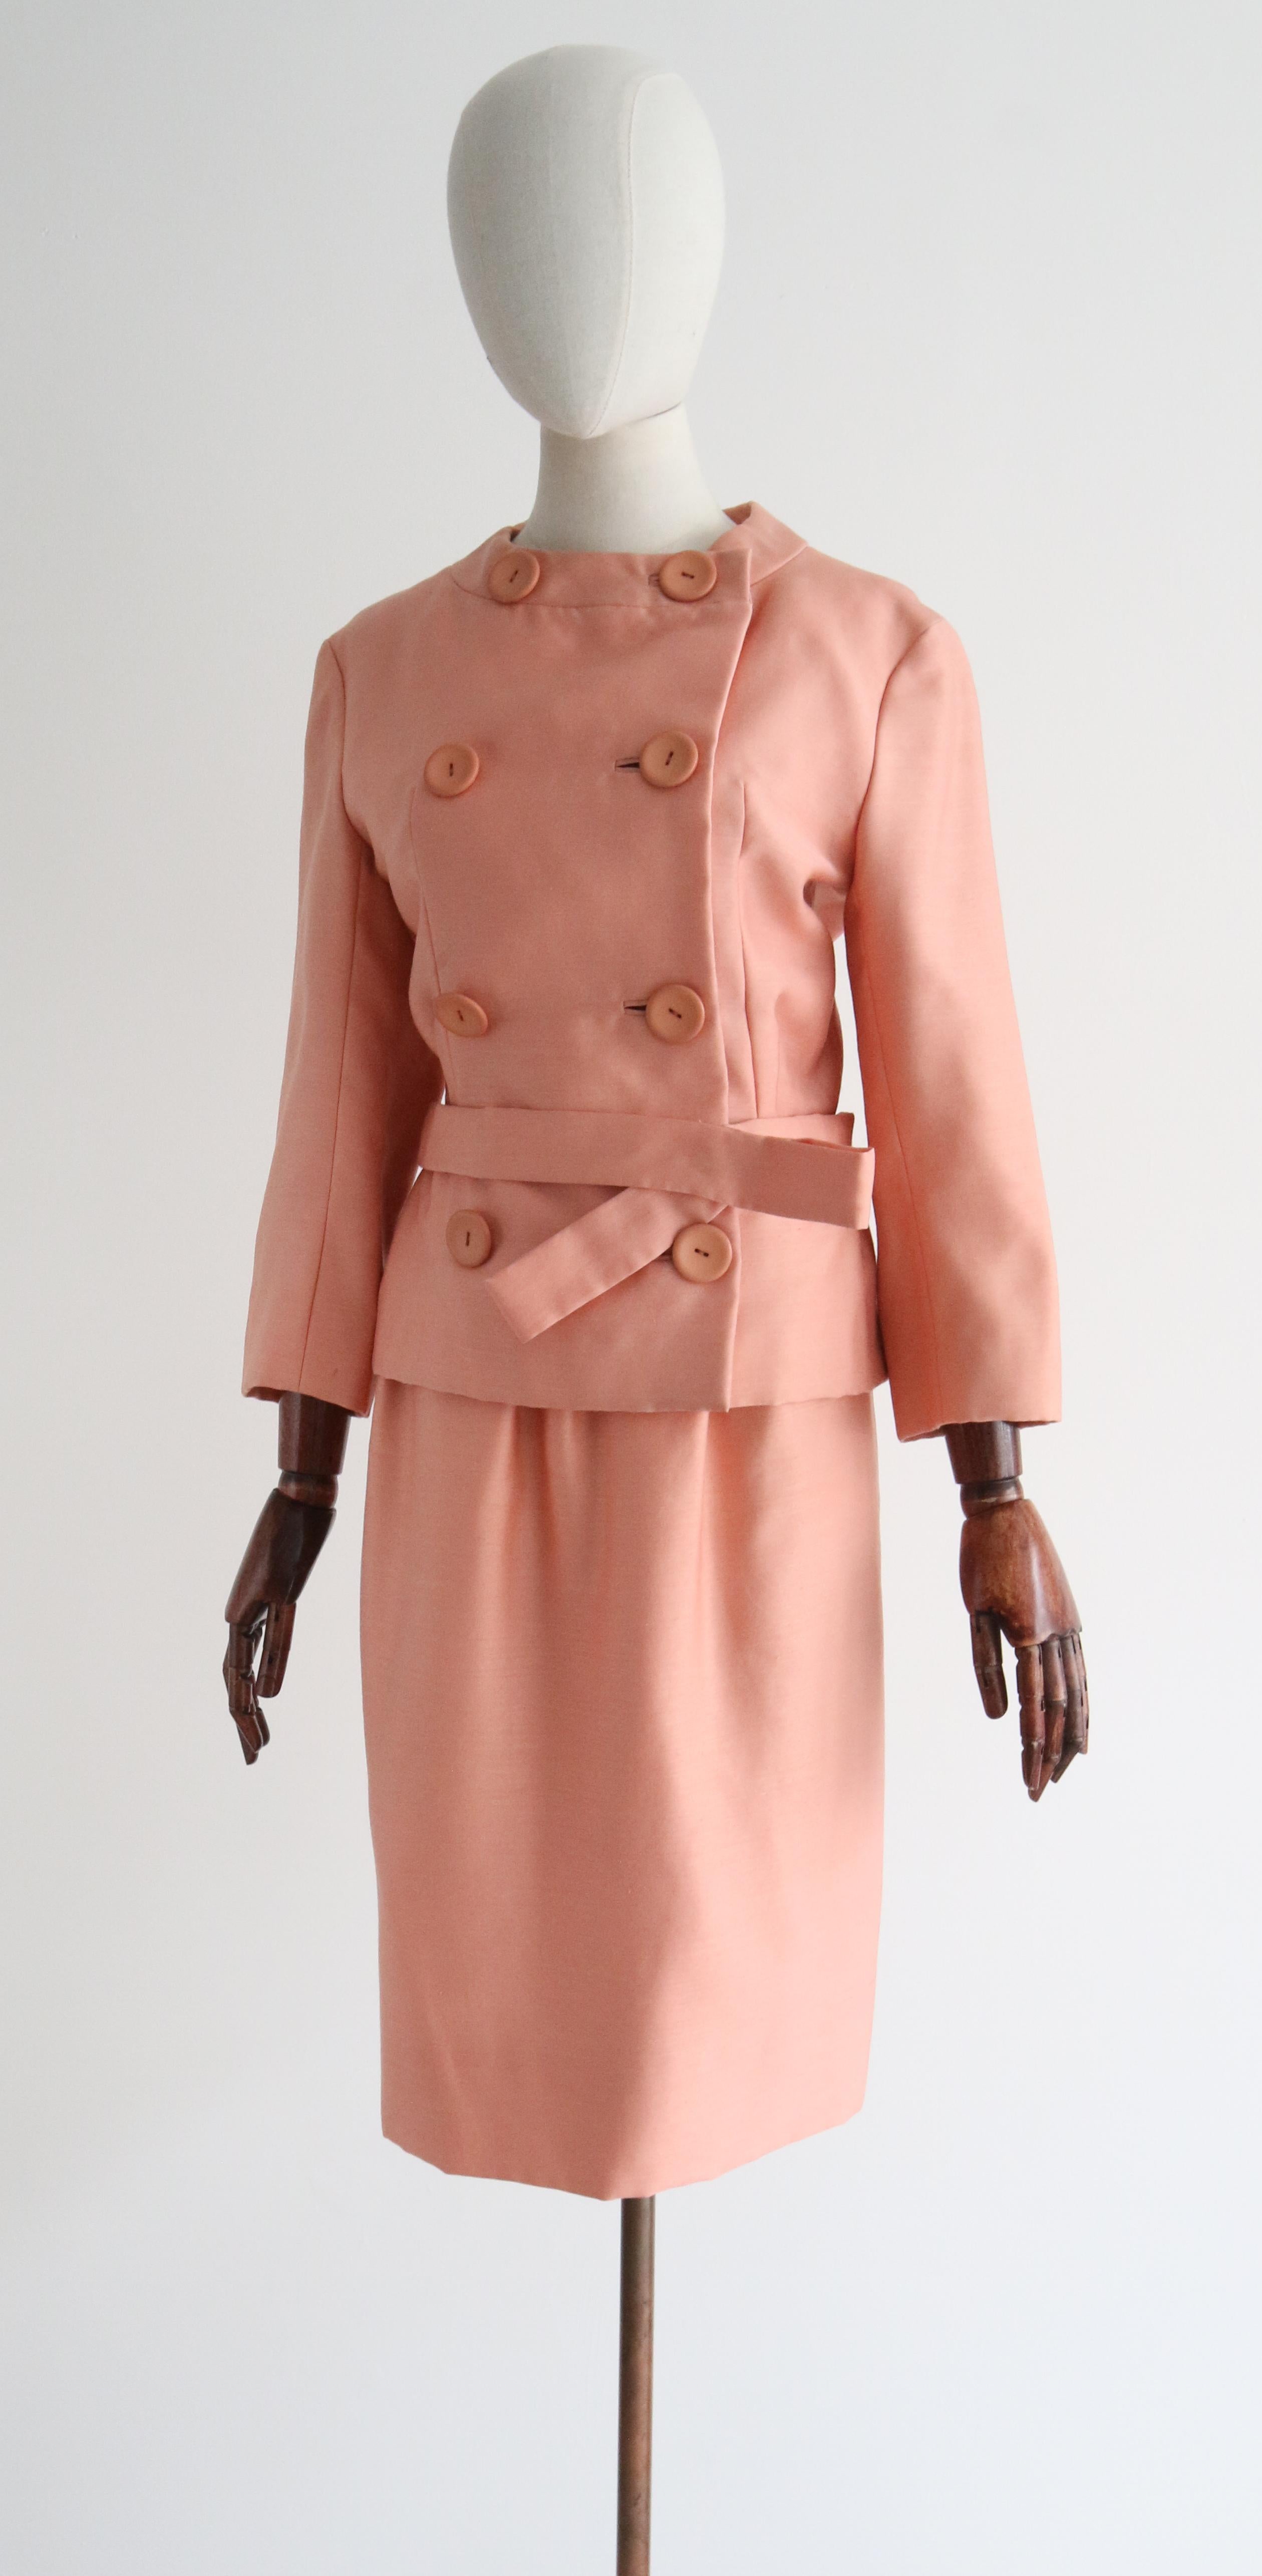 Vintage 1960's Christian Dior Peach Pink Silk Skirt Suit UK 6 US 2 For Sale 4